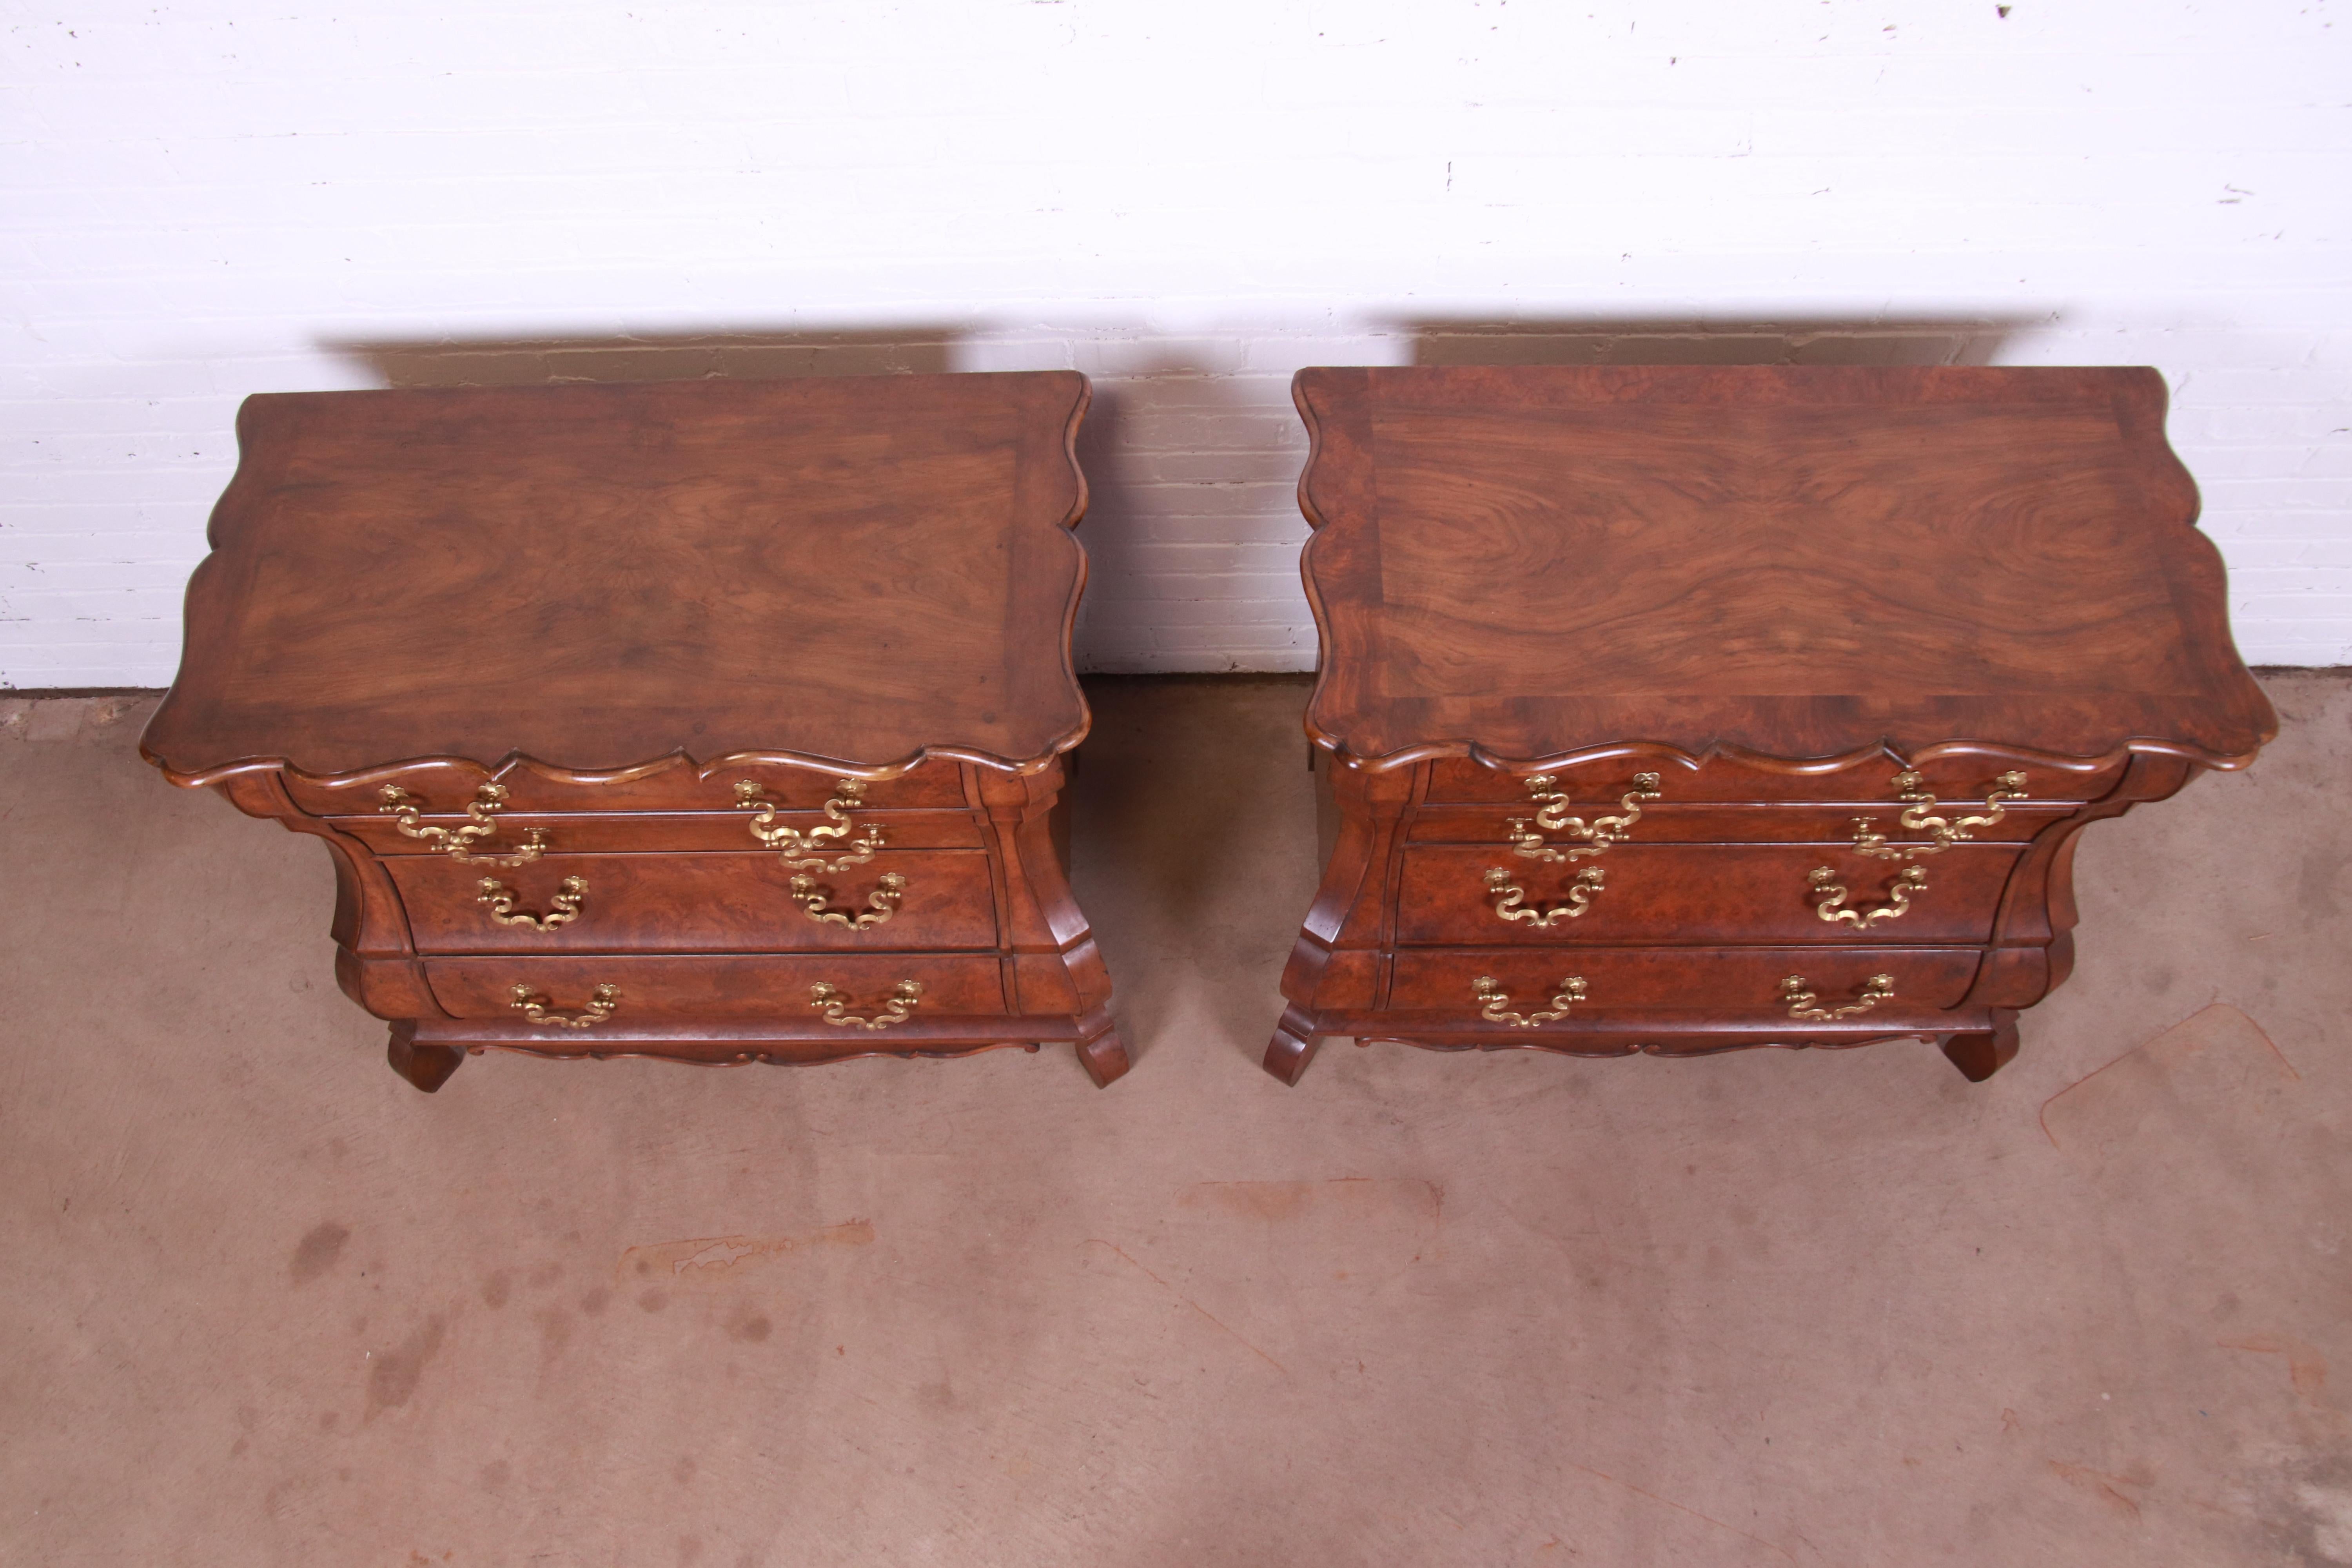 Baker Furniture Dutch Burled Walnut Bombe Chests or Commodes, Pair 1